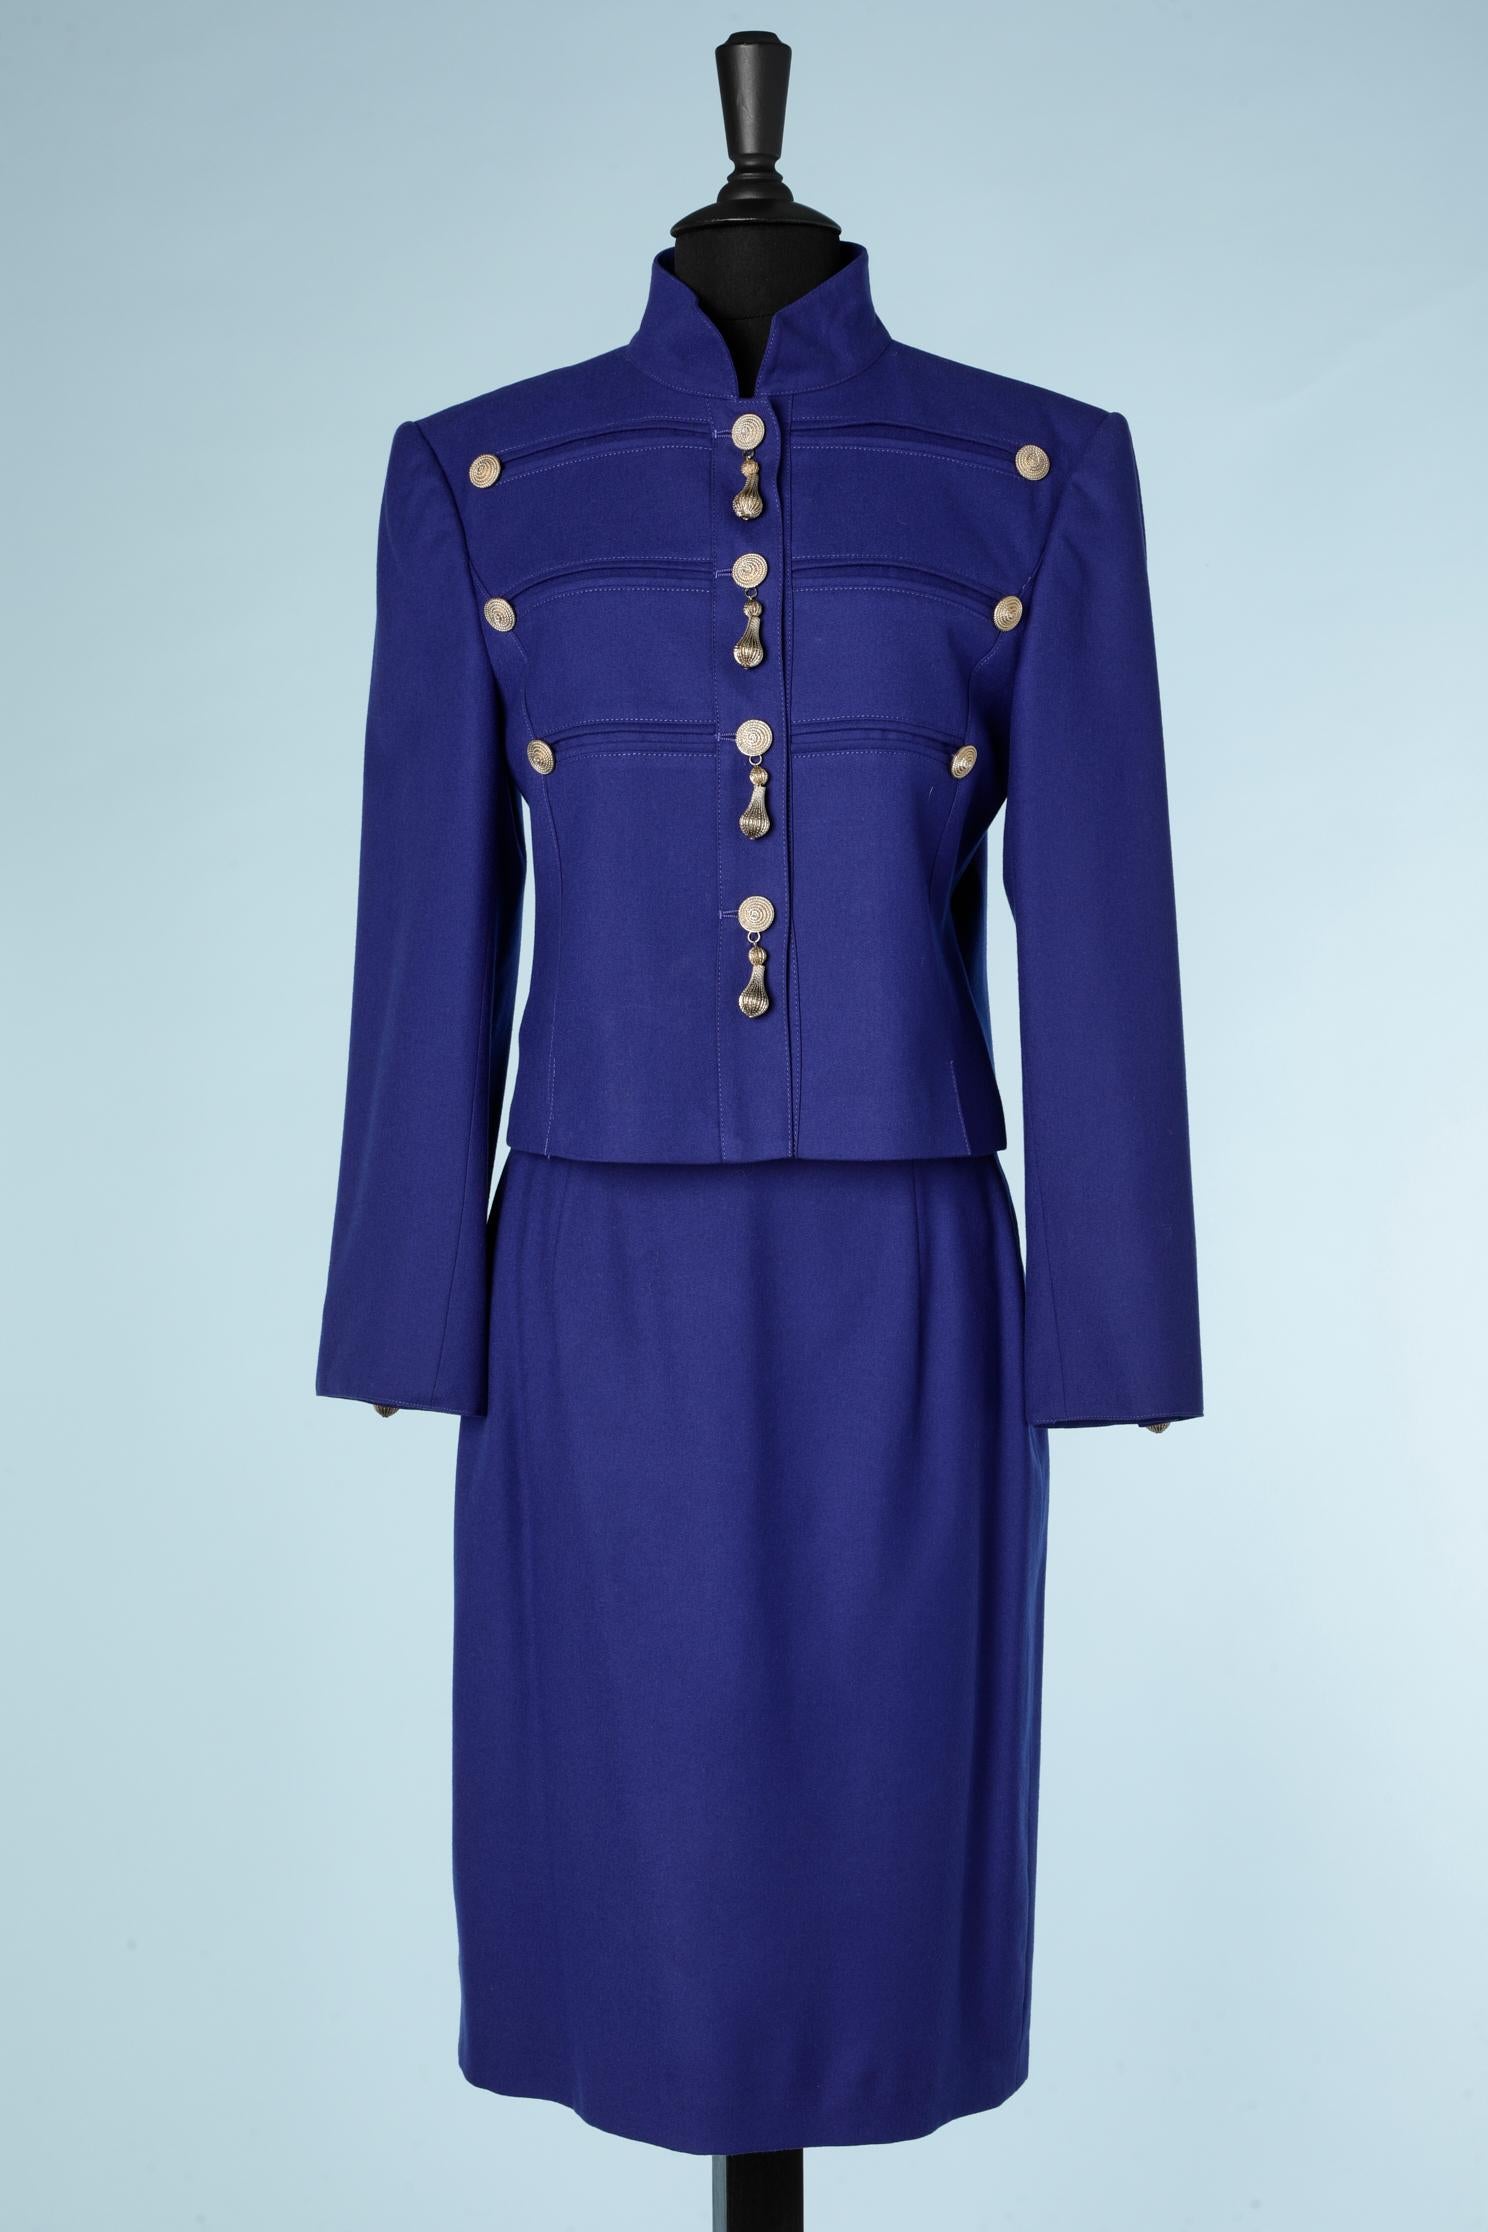 Blue wool skirt suit with gold metal embellishments
SIZE M (Fr 38)